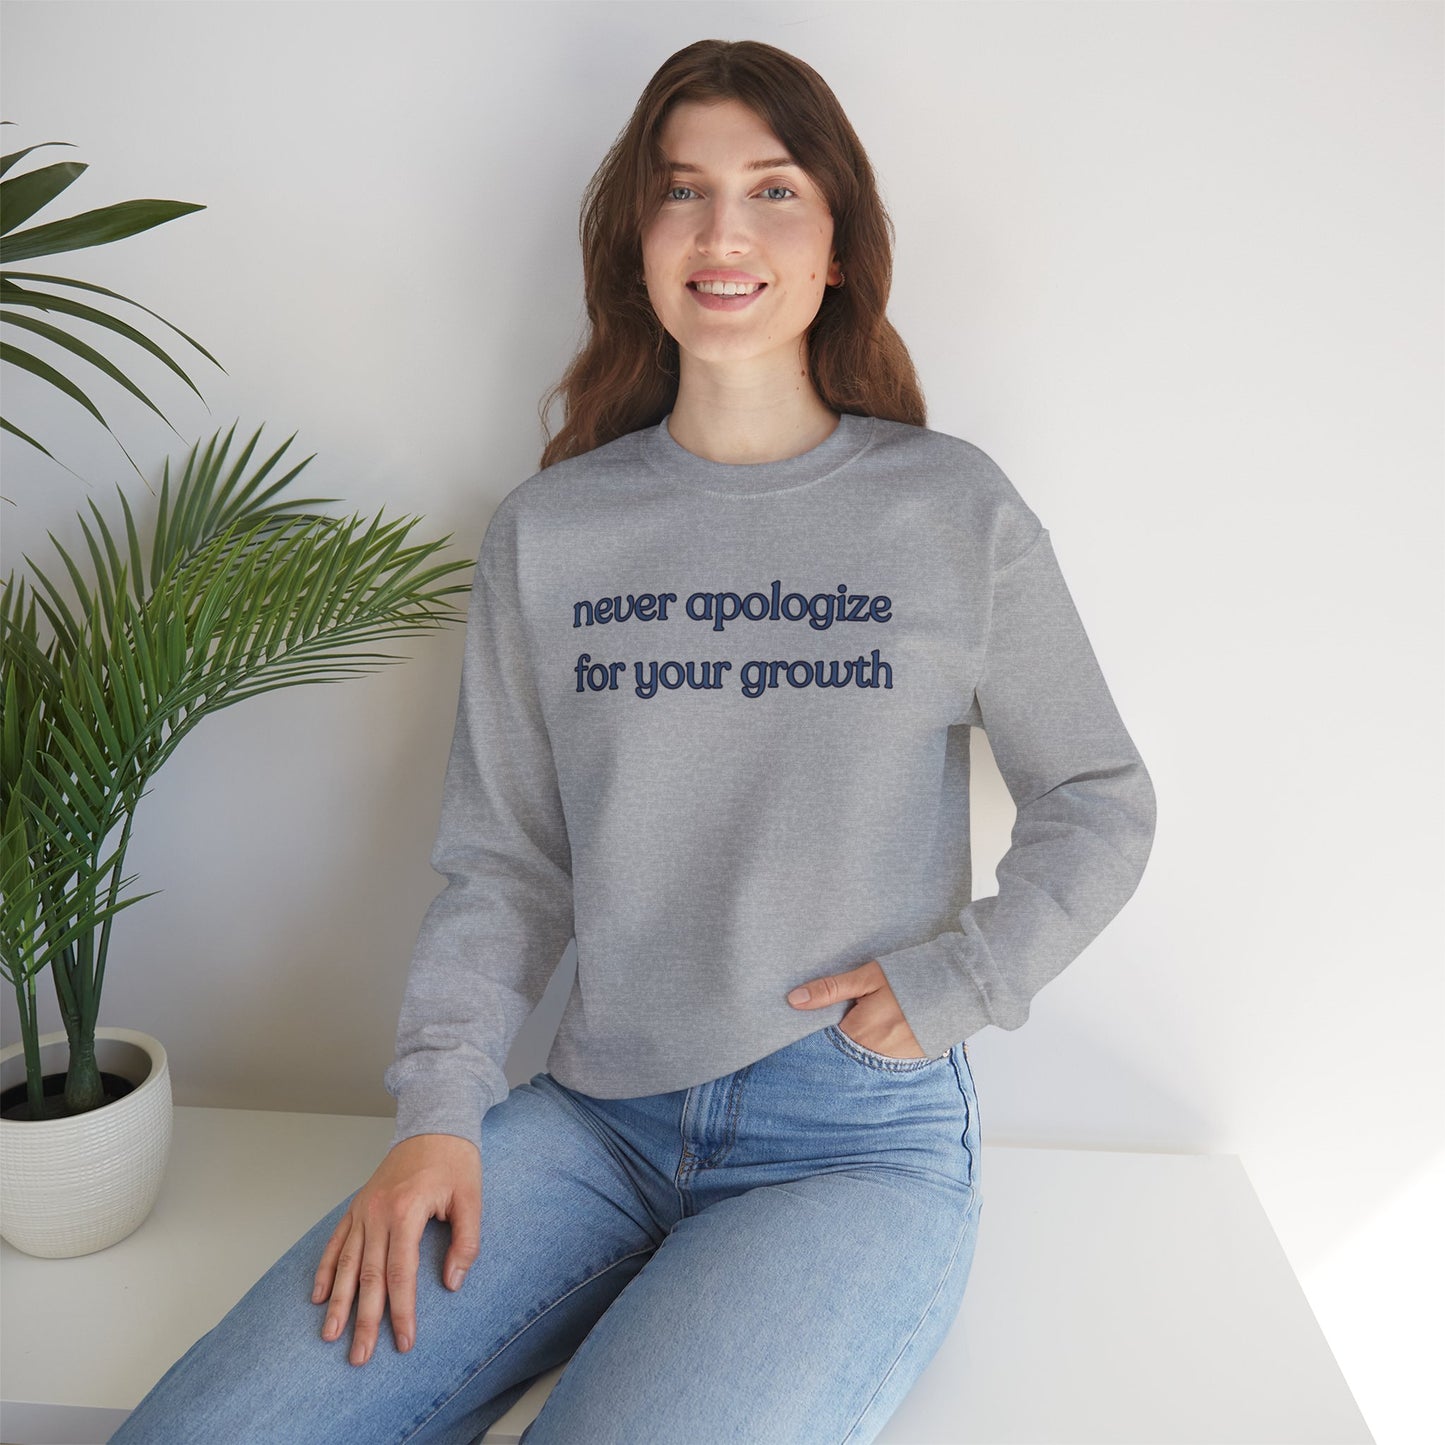 A sage message of “never apologize for your growth”. Give the gift of this Unisex Heavy Blend™ Crewneck Sweatshirt or get one for yourself.